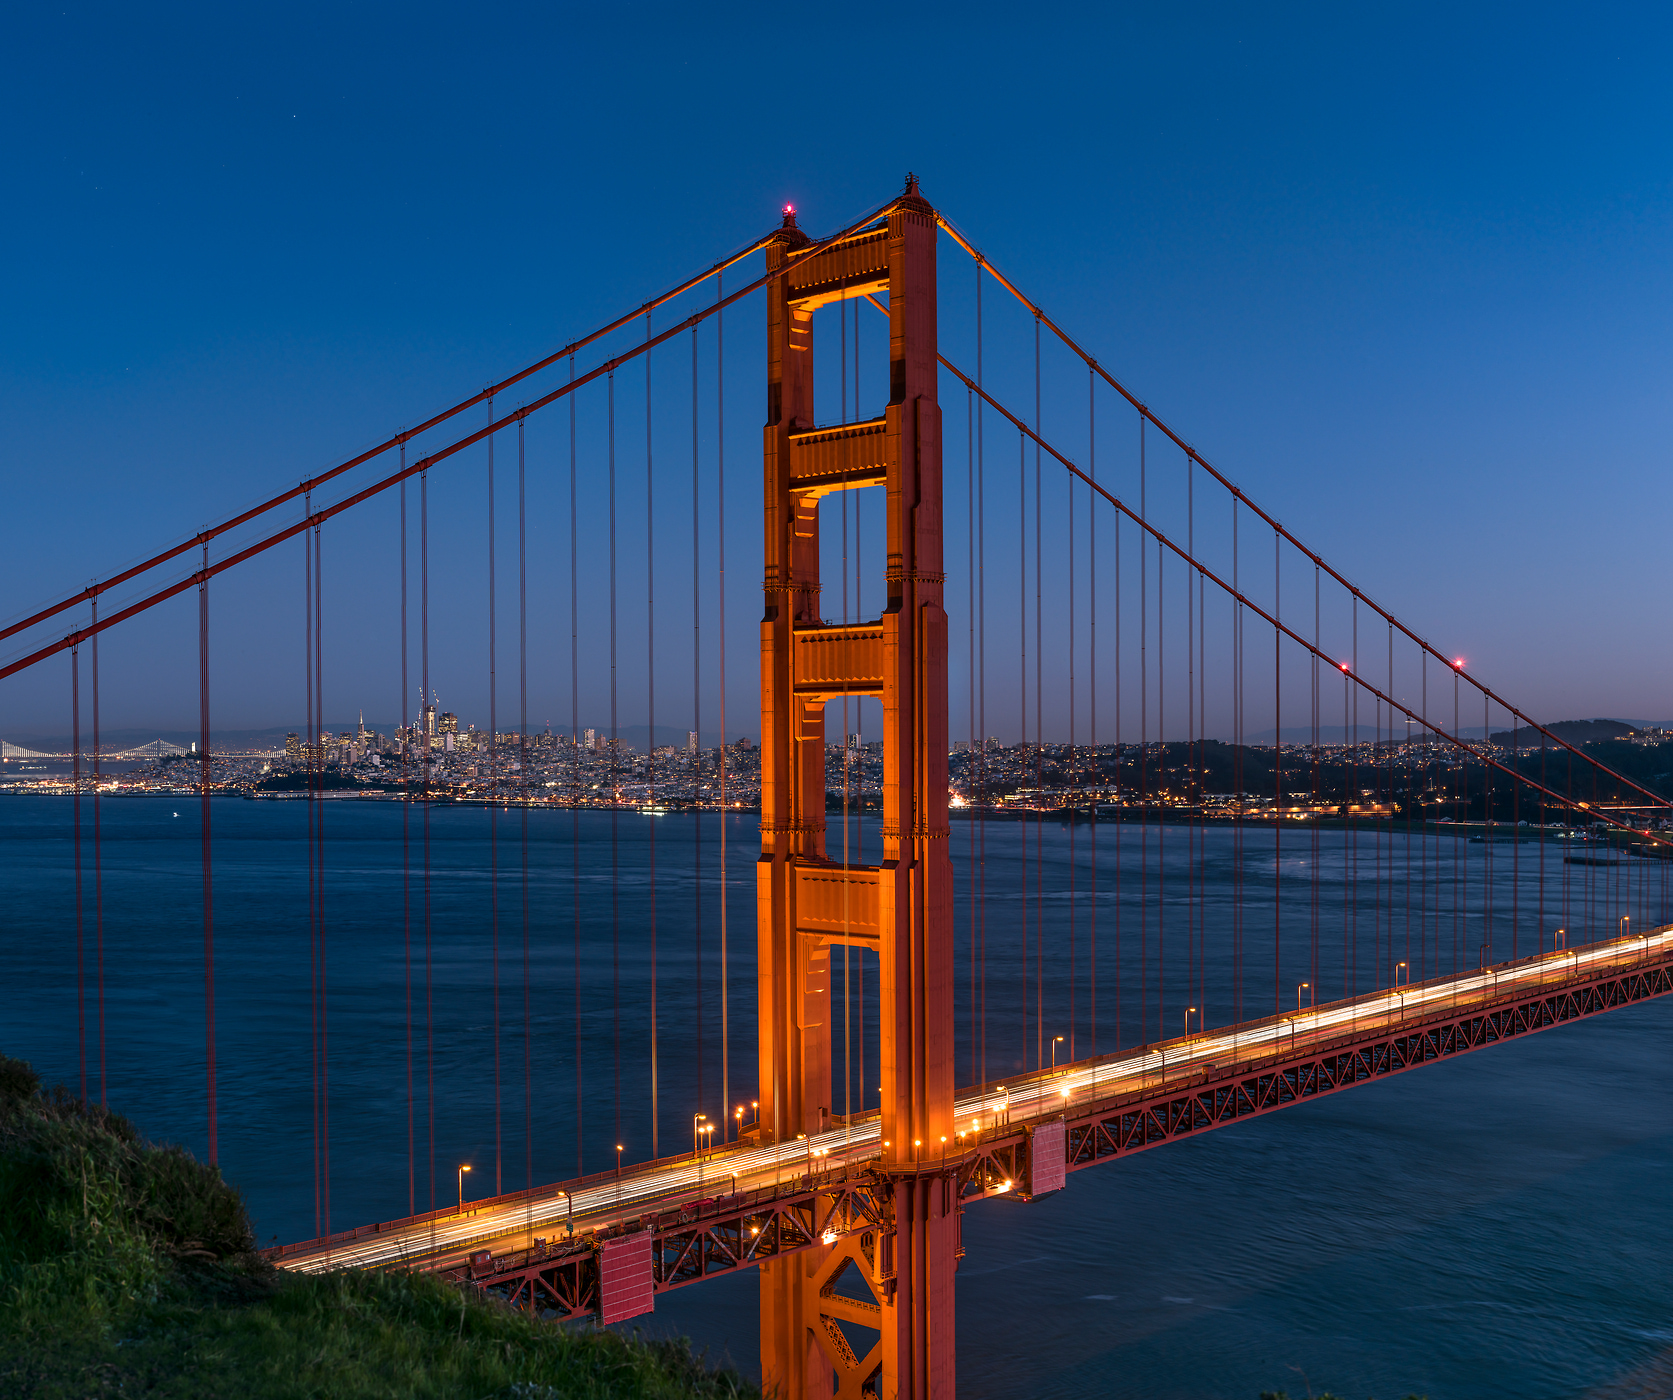 298 megapixels! A very high resolution, large-format VAST photo print of the Golden Gate Bridge, San Francisco, and the San Francisco Bay; cityscape fine art photo created by Justin Katz from Battery Spencer in Sausalito, California